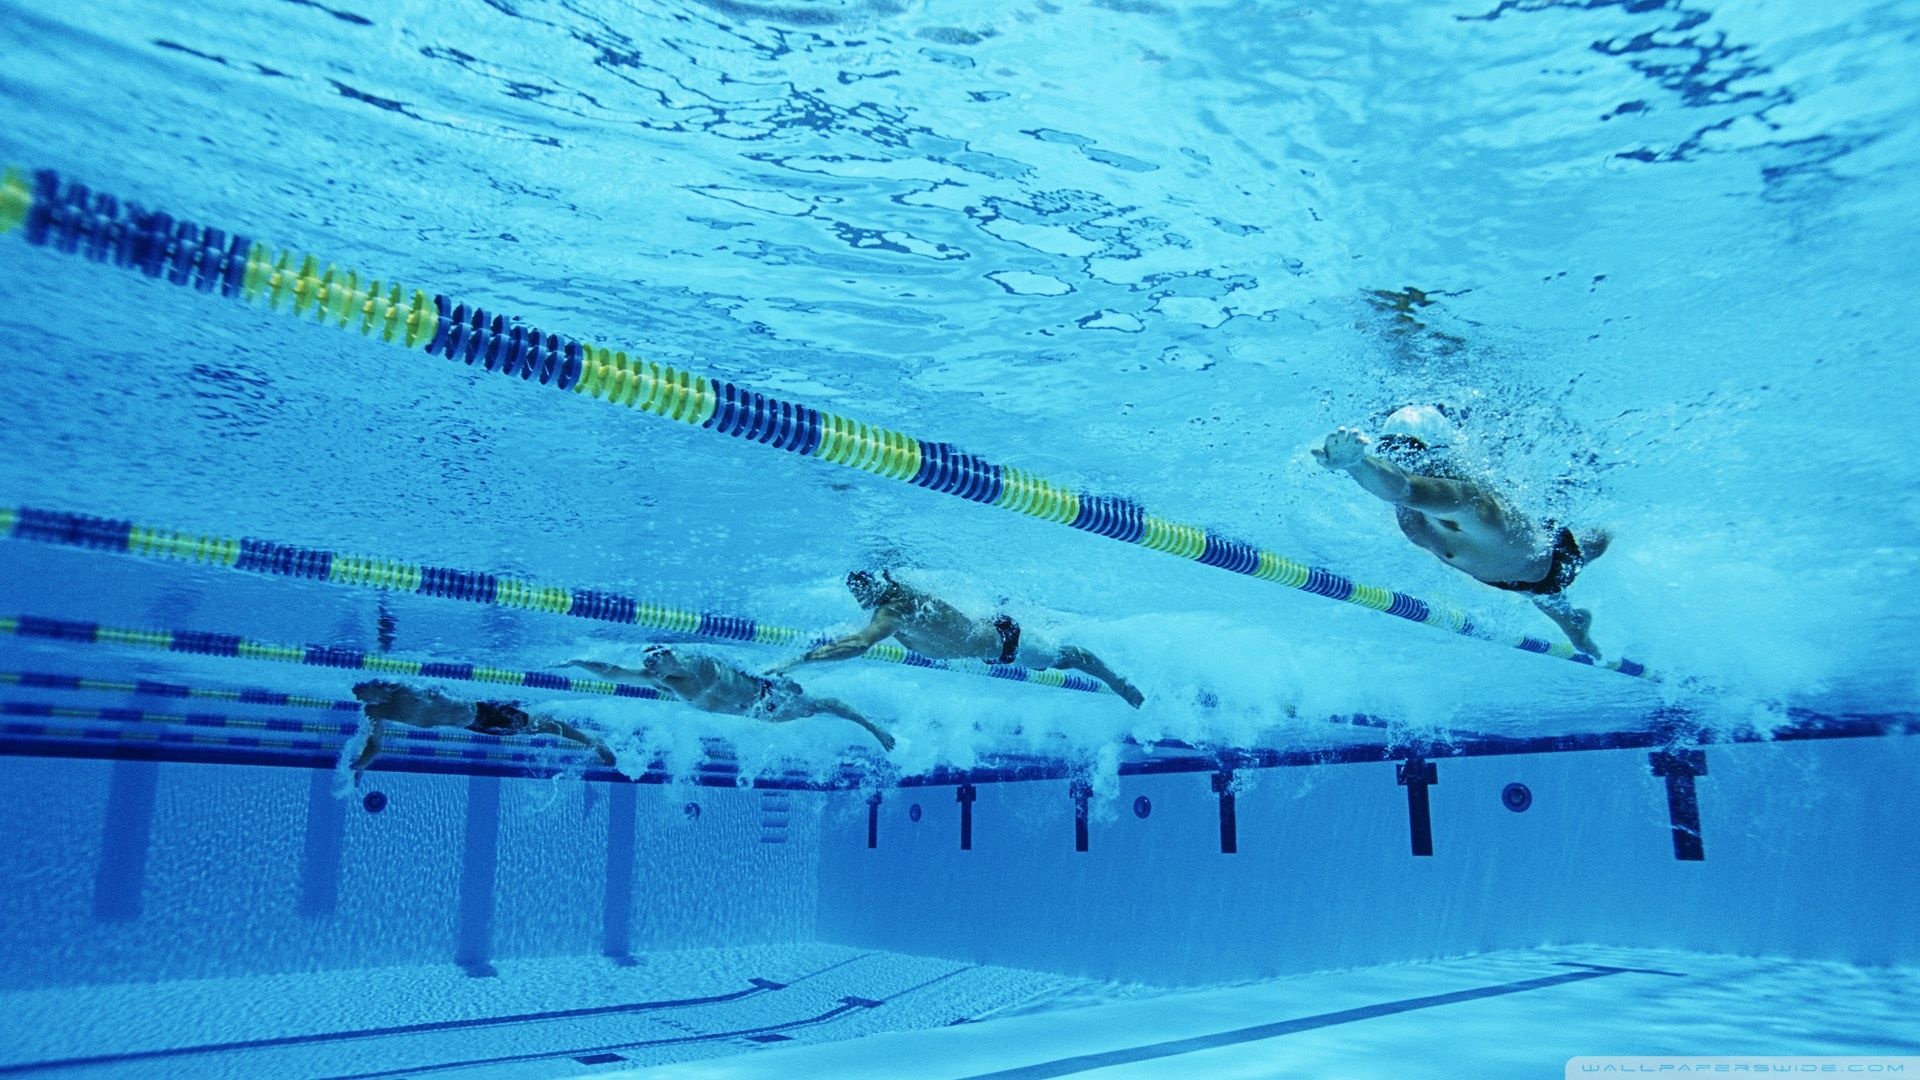 Swimming: Front crawl, The fastest style for moving over the water on the surface. 1920x1080 Full HD Wallpaper.